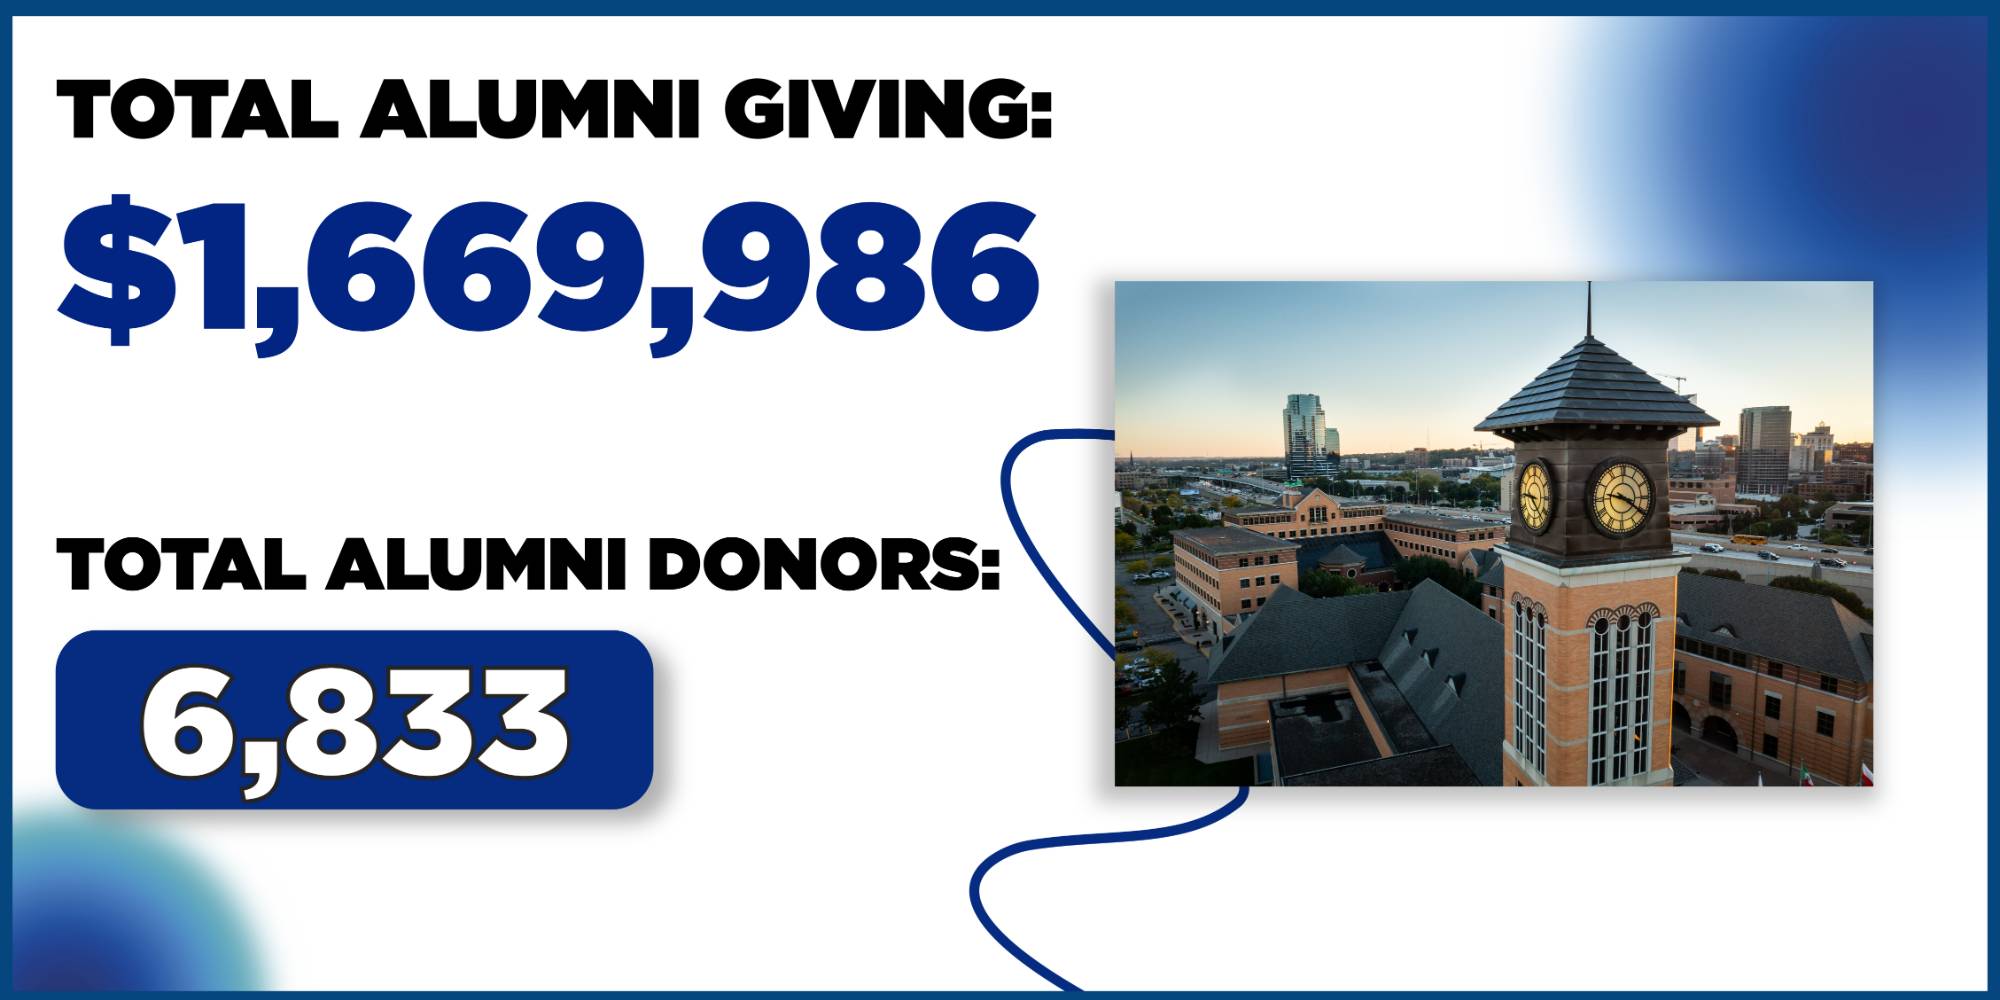 Total Alumni Giving: $1,669,986. Total Alumni Donors: 6,833. A picture of the downtown Beckering Carillon Tower at sunrise is shown to the right of the numeric information.